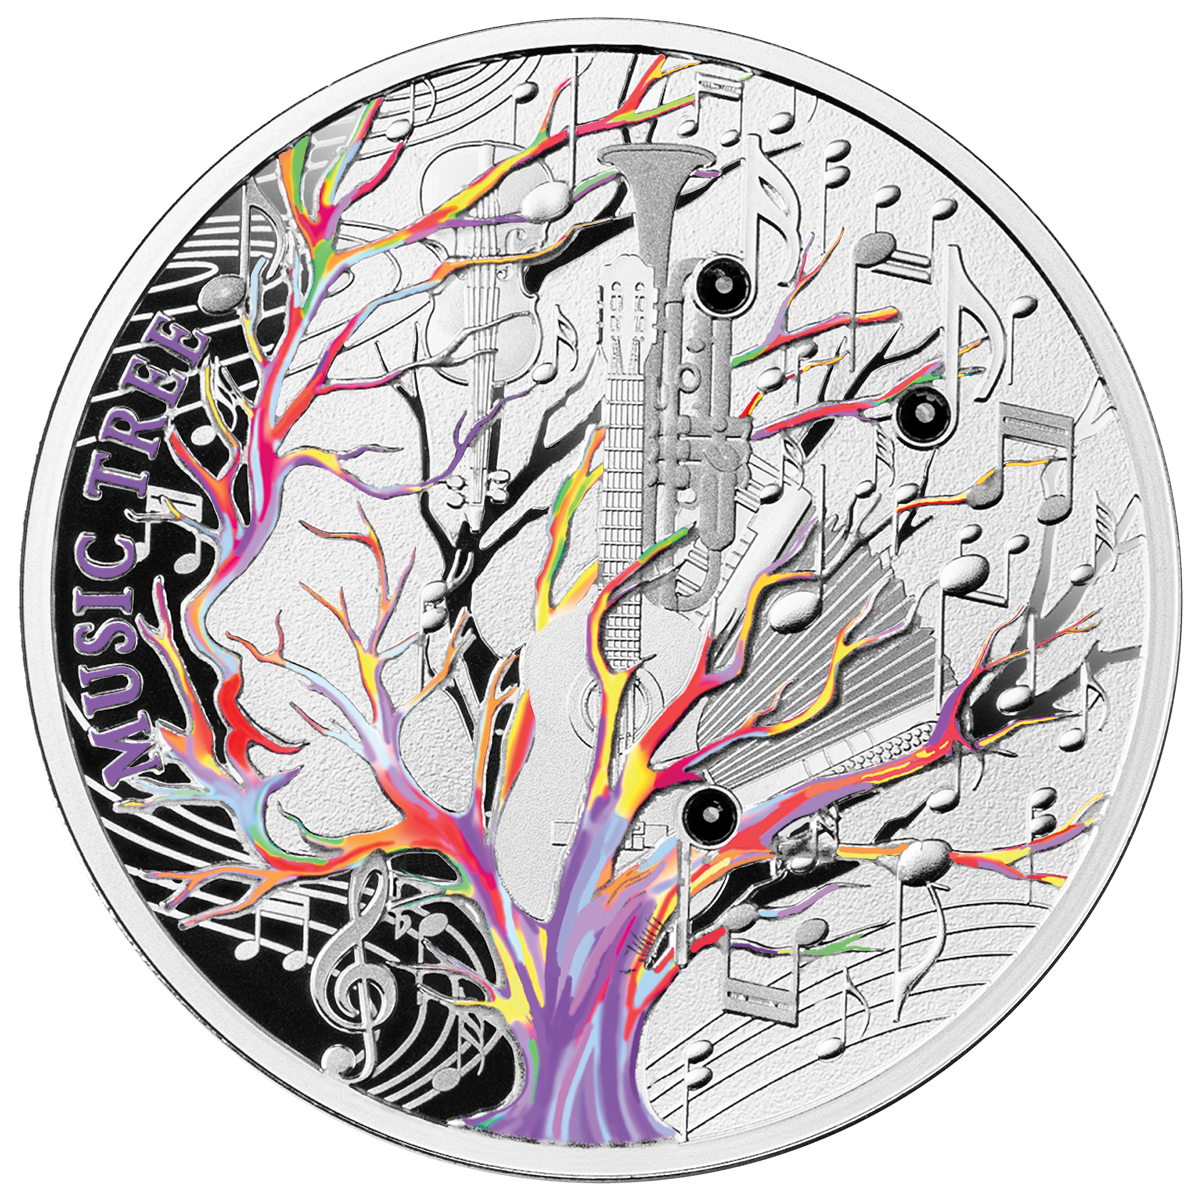 2023 Music Tree 17.50g Silver Coin with Crystal Inserts